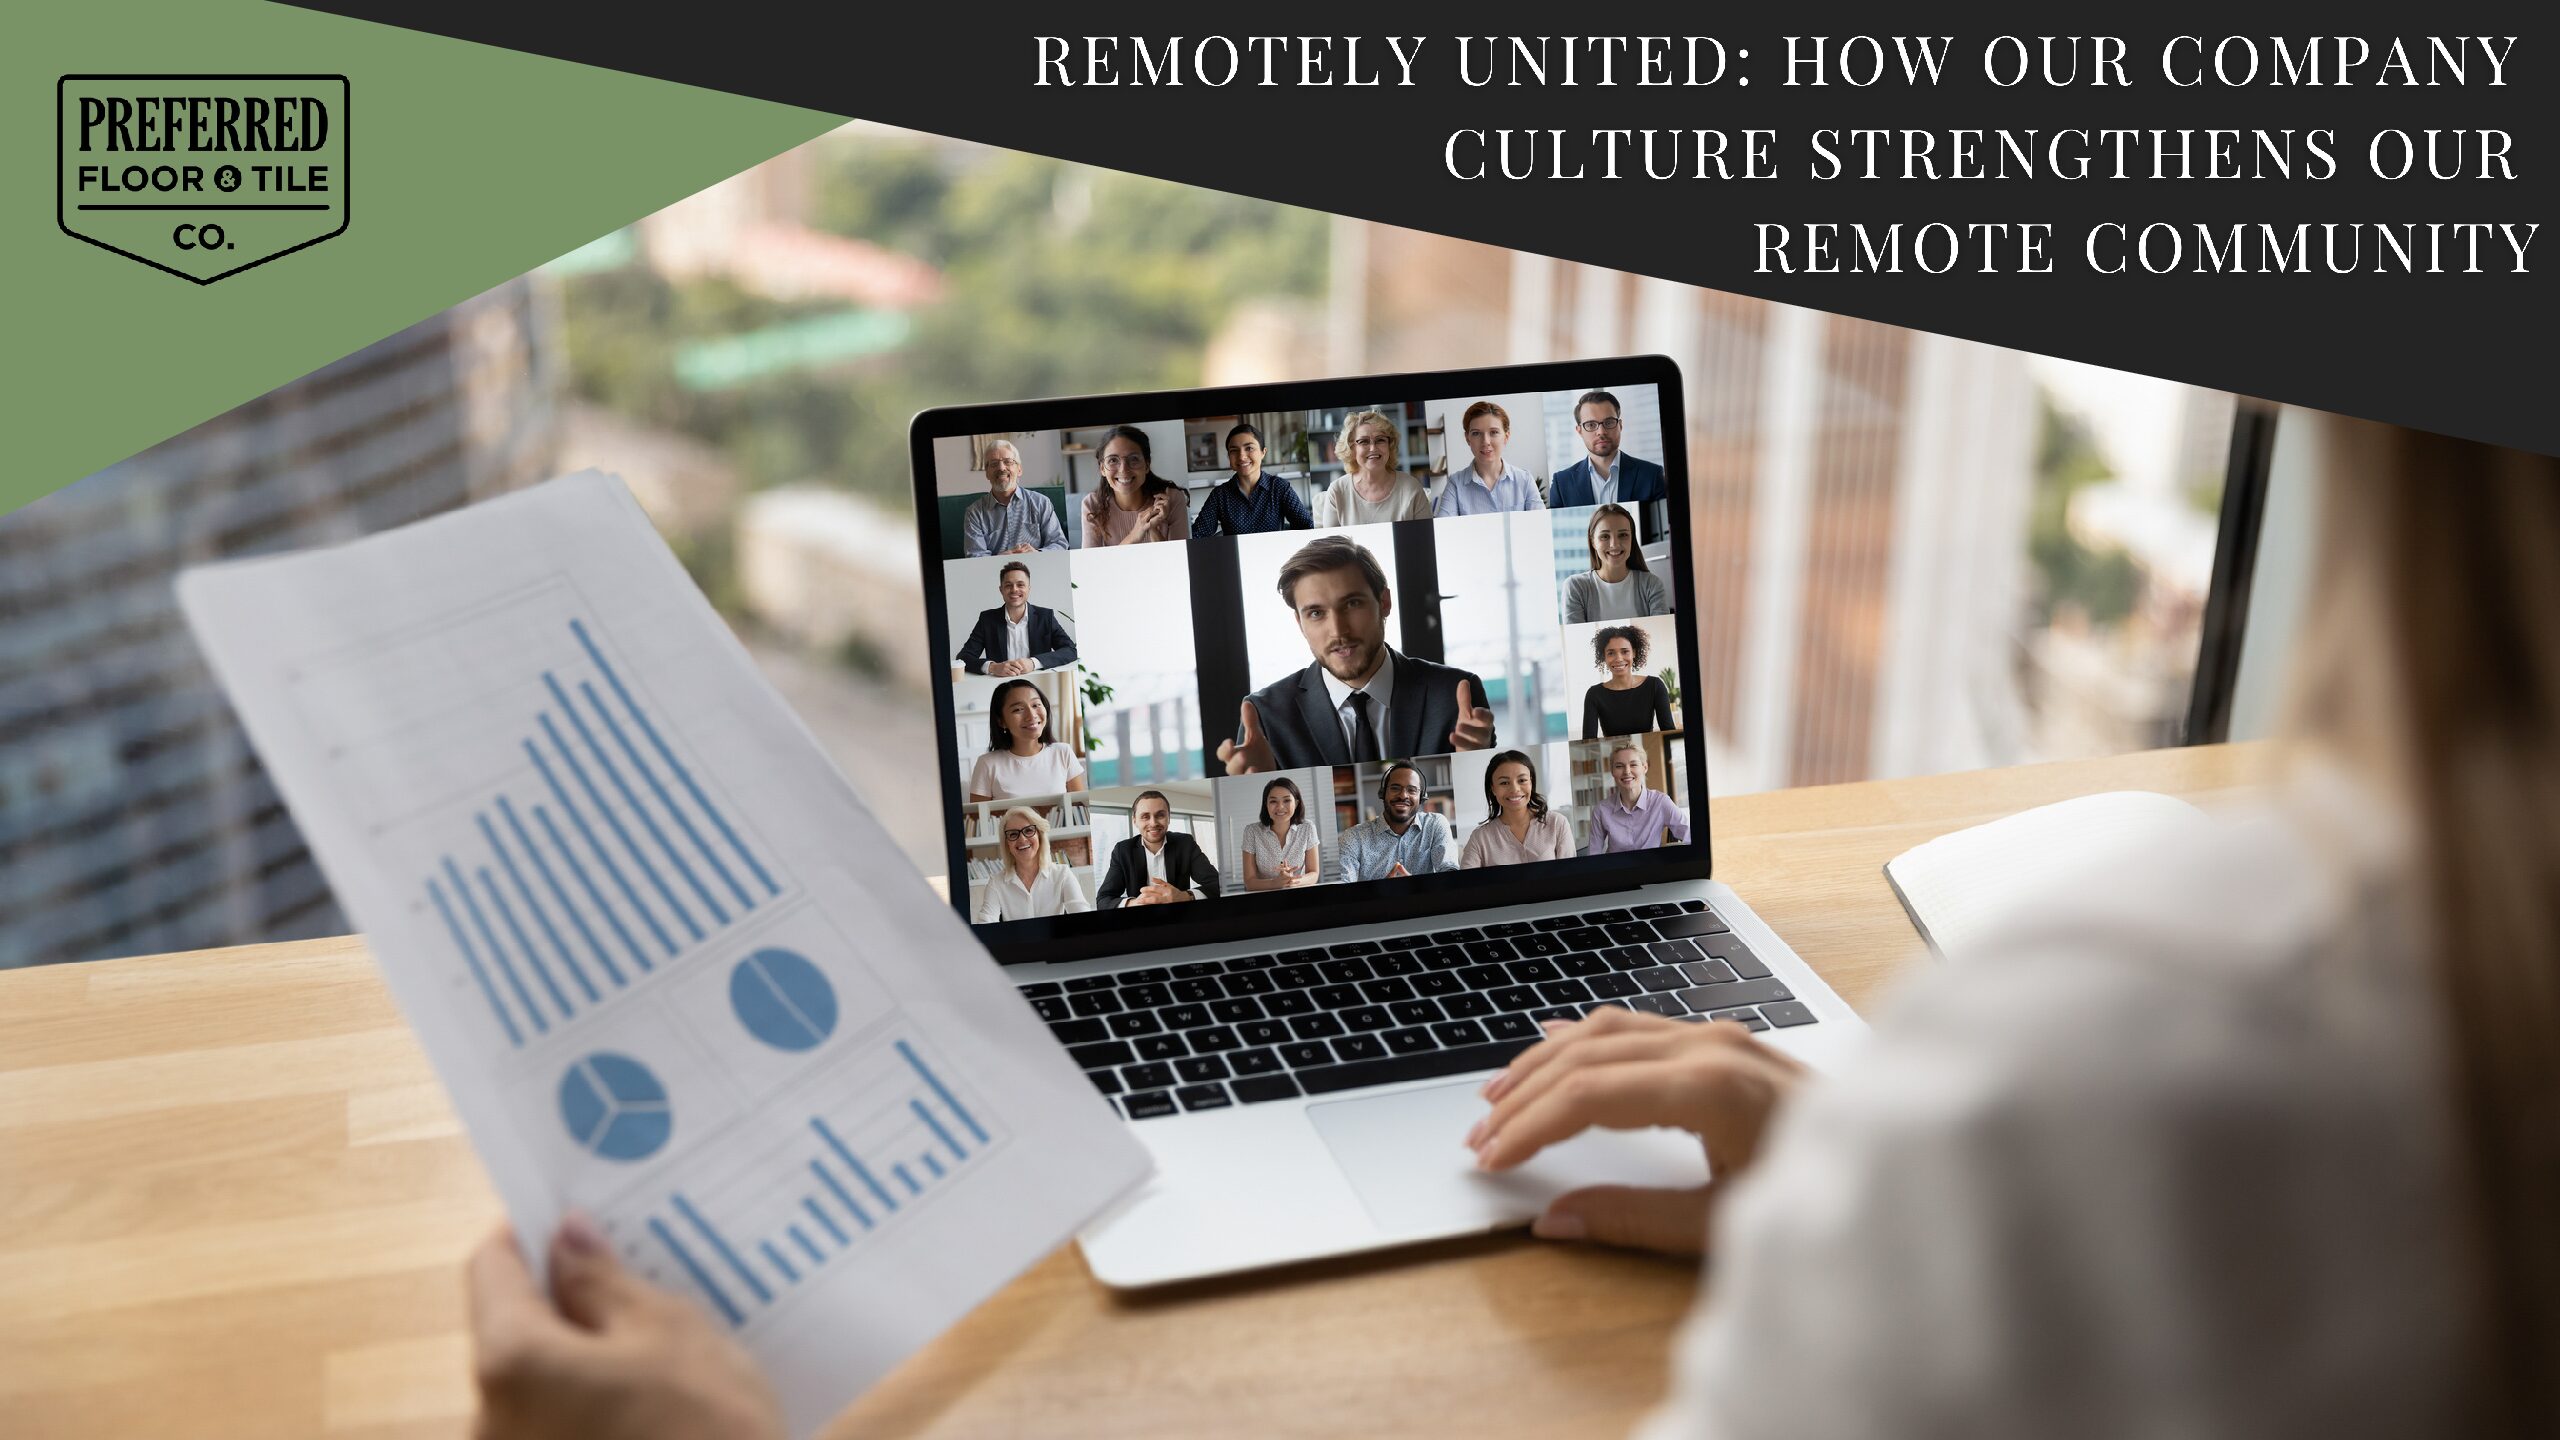 Remotely United: How Our Company Culture Strengthens Our Remote Community